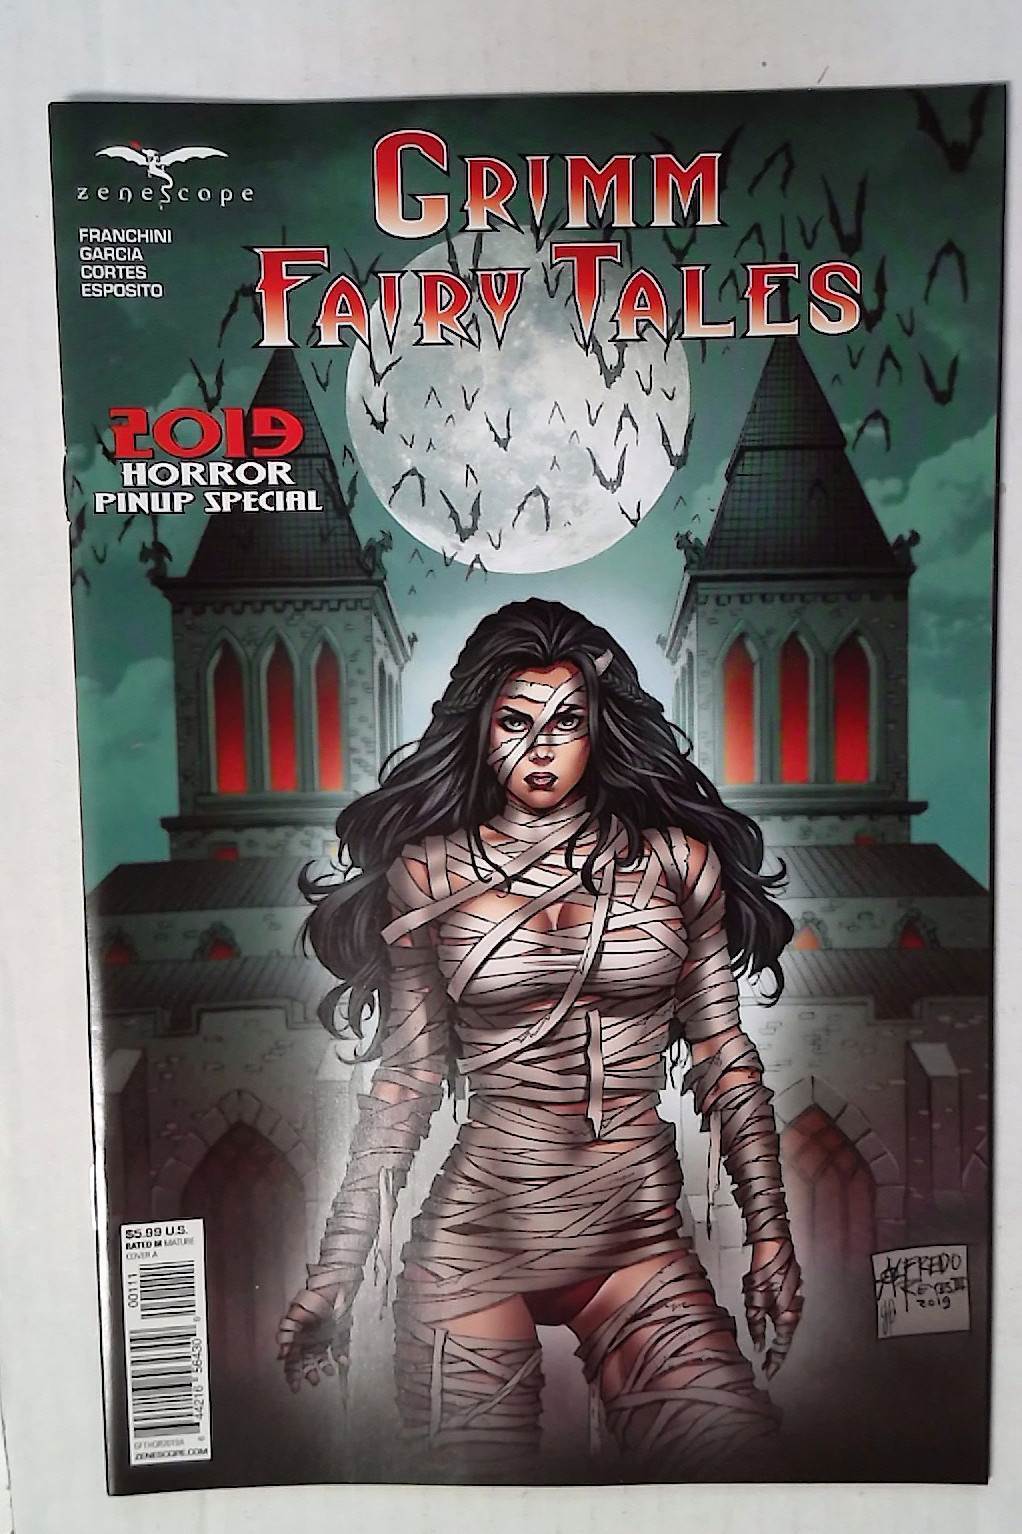 Grimm Fairy Tales 2019 Horror Pinup Special #0 Zenescope (2019) Comic Book